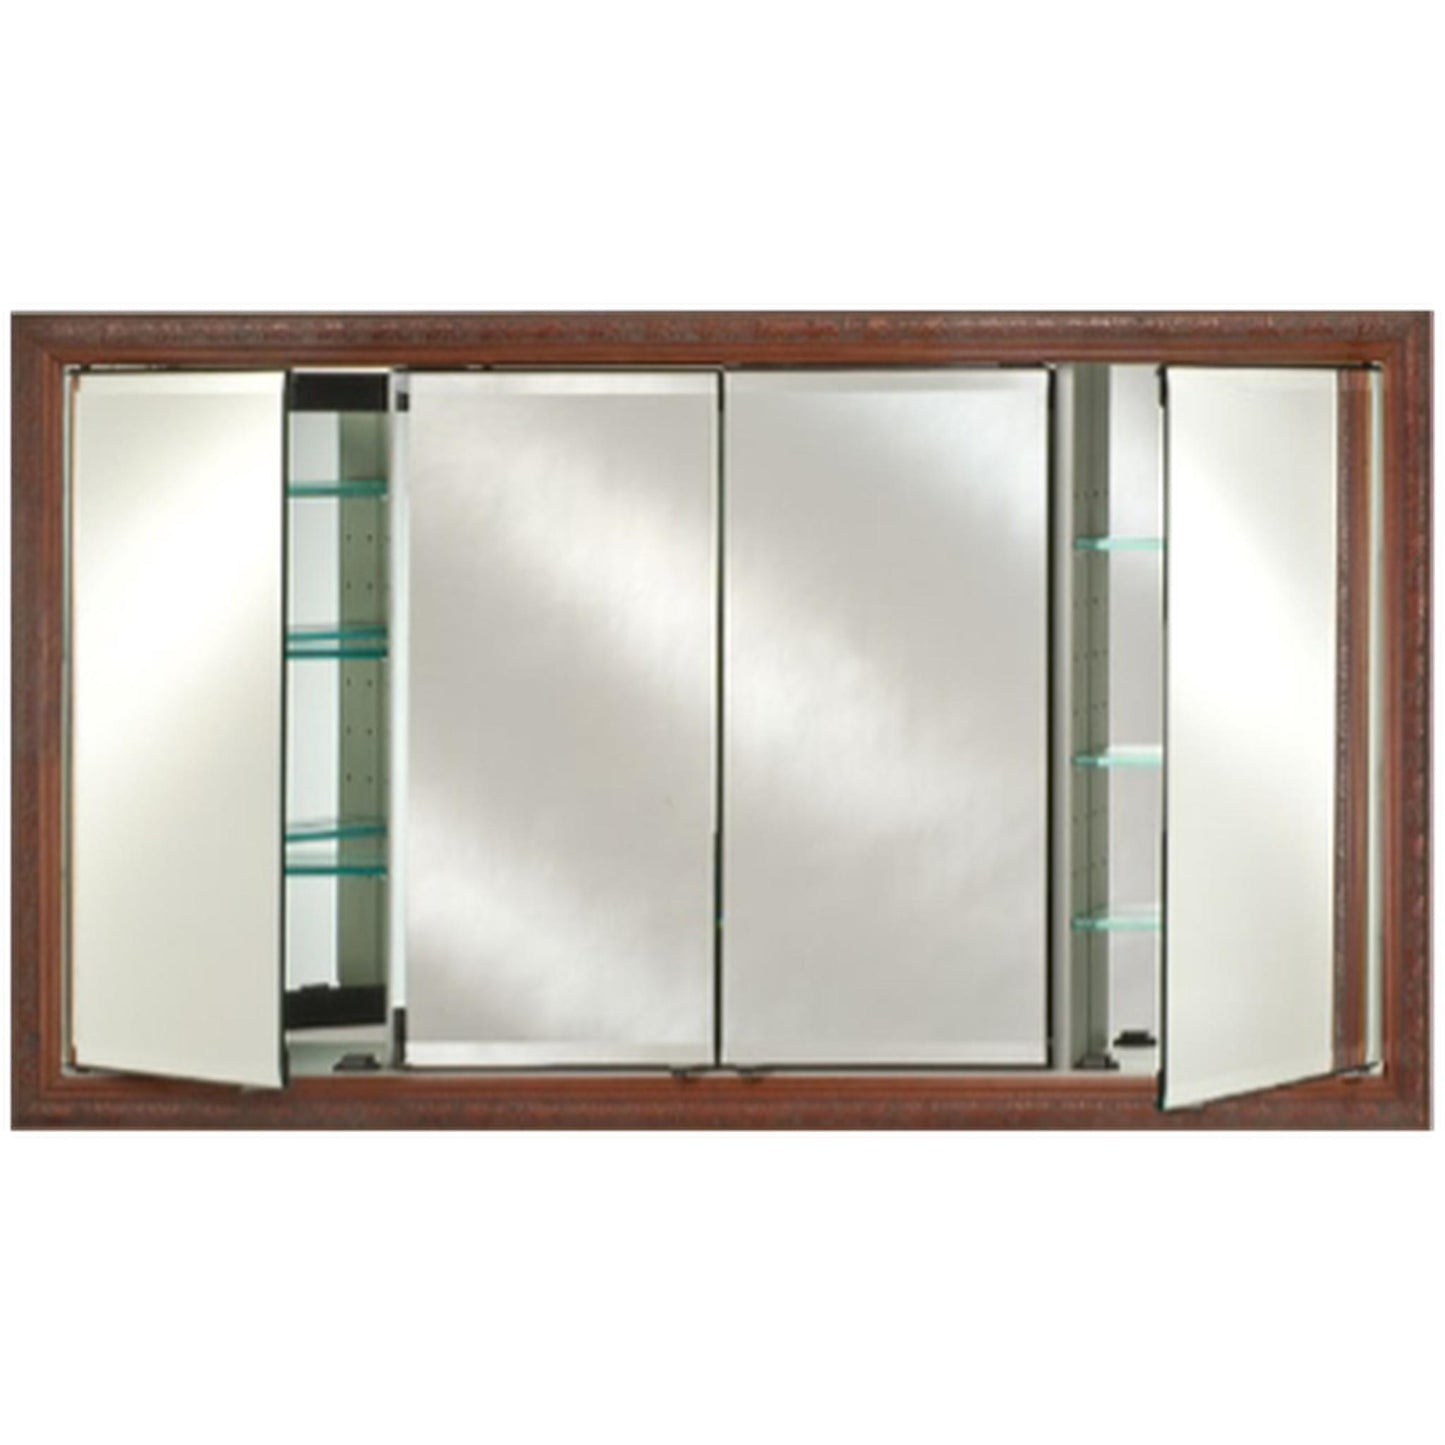 Afina Signature 58" x 30" Polished Glimmer-Flat Recessed Four Door Medicine Cabinet With Beveled Edge Mirror